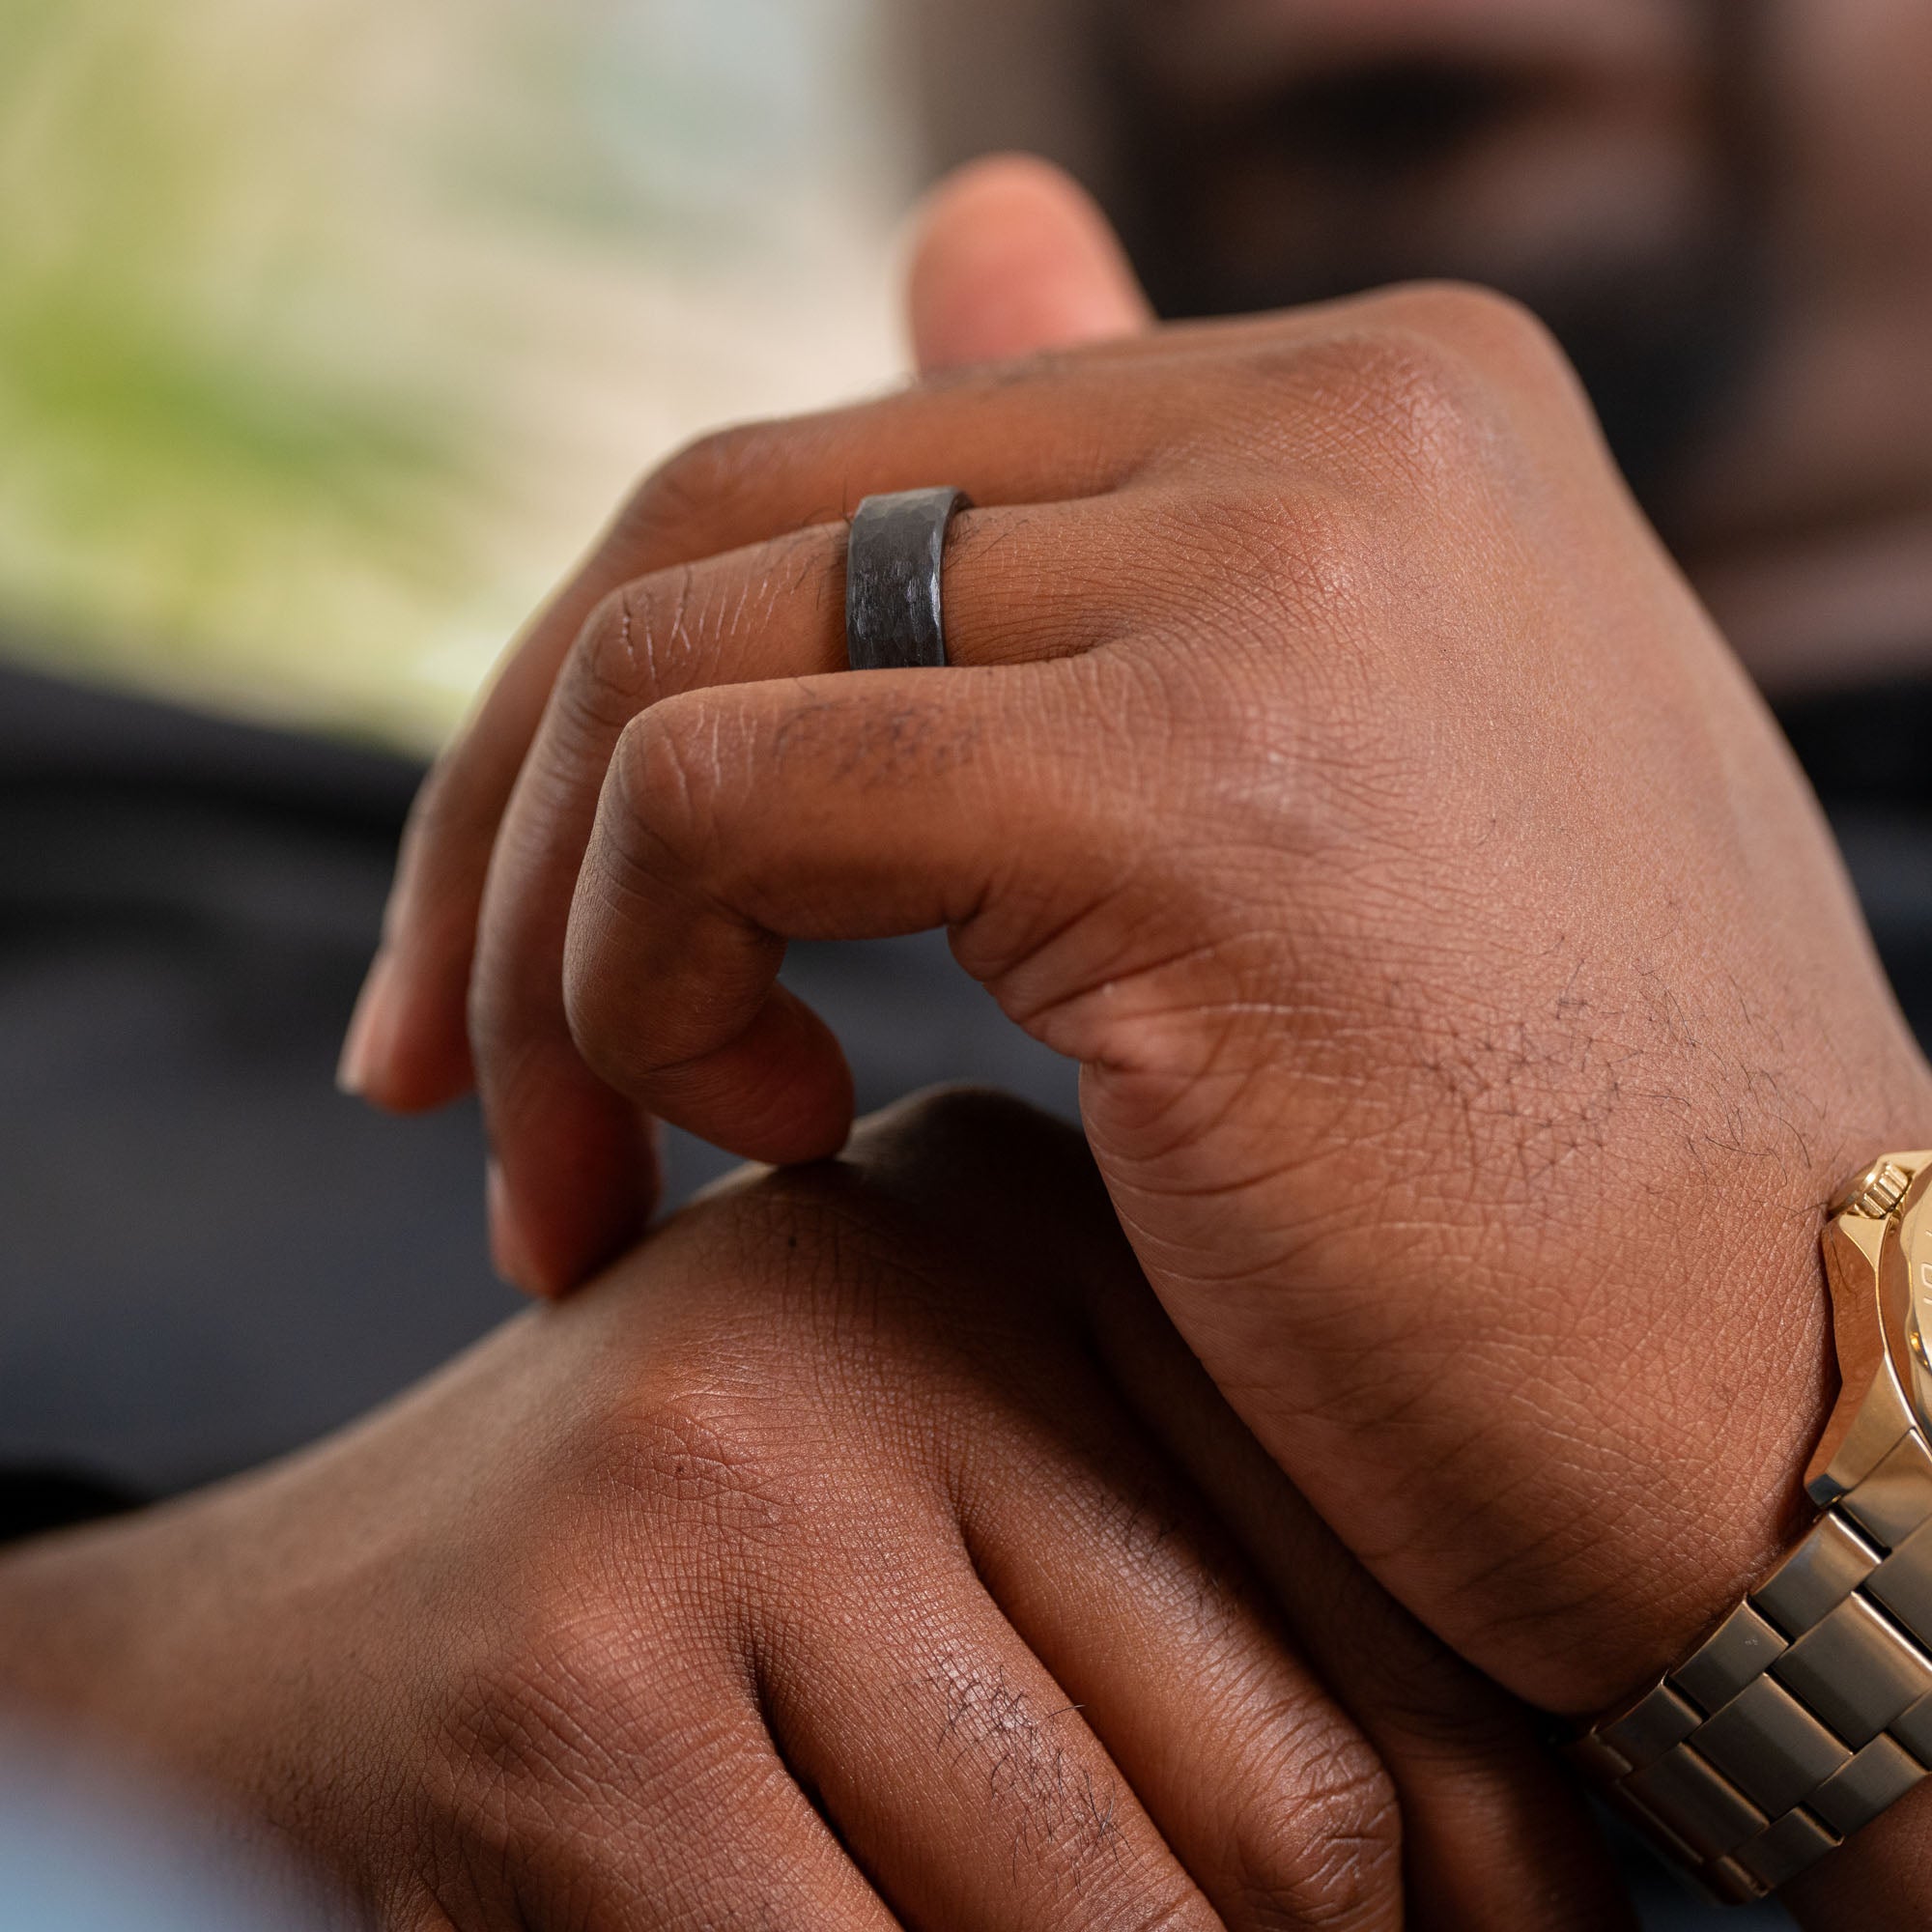 Why do some married men put their ring on the right hand instead of the  left one? - Quora